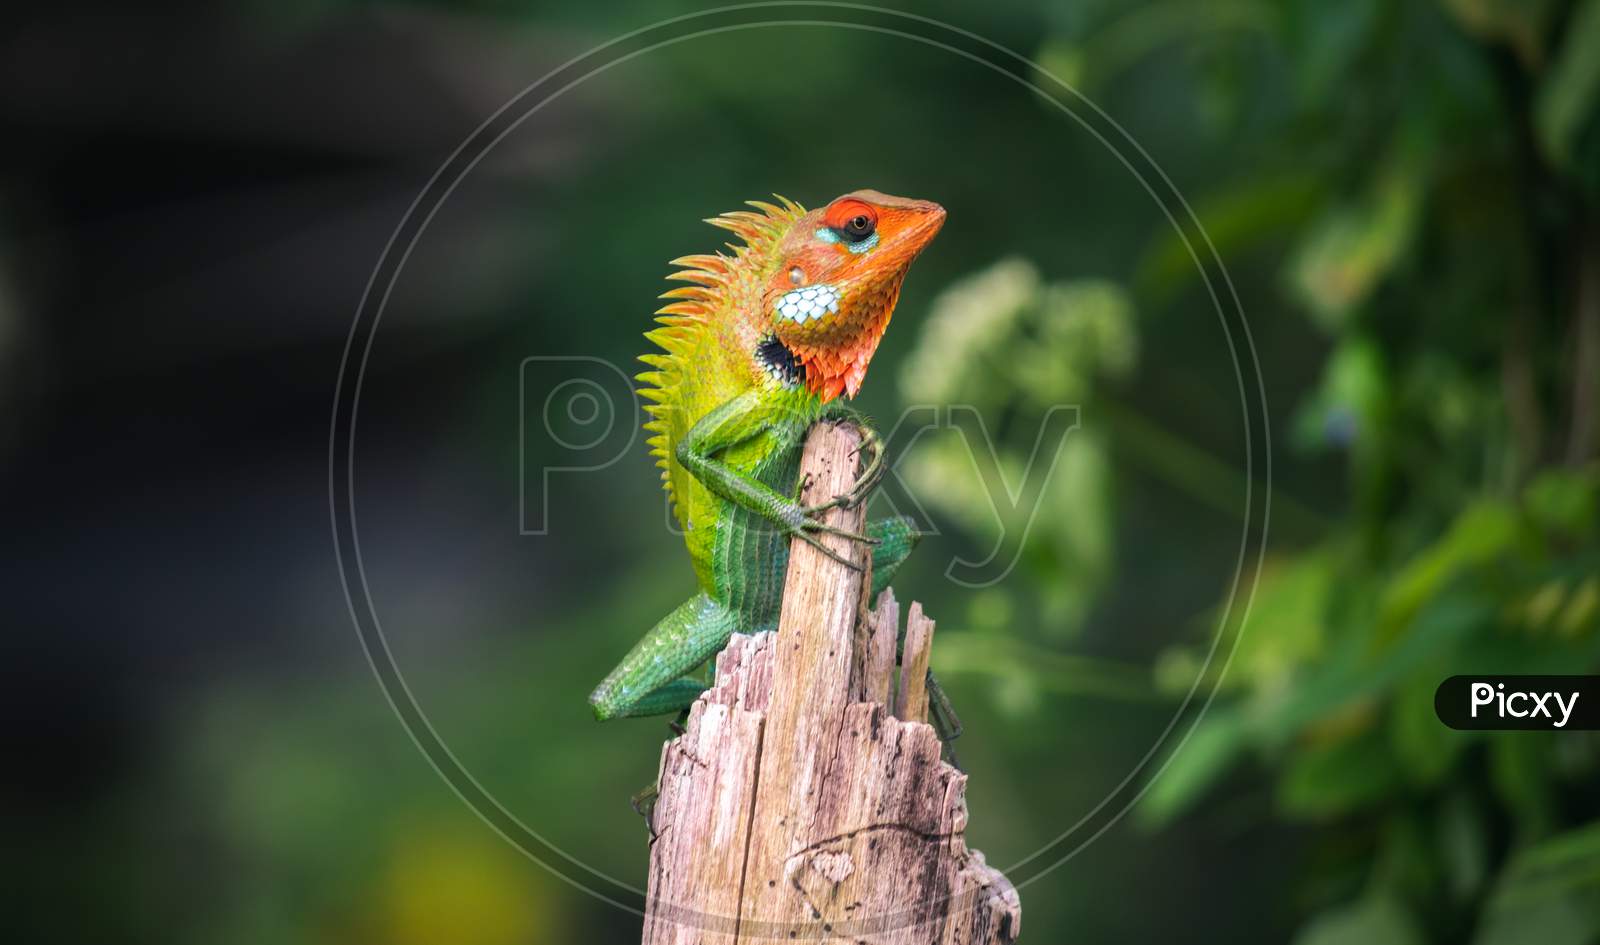 Beautiful Green Garden Lizard Climb And Sitting On Top Of A Wooden Trunk Like A King Of The Jungle, Bright Orange-Colored Head And Sharp Yellowish Spines In The Back, Vivid Saturated Colored Skin.